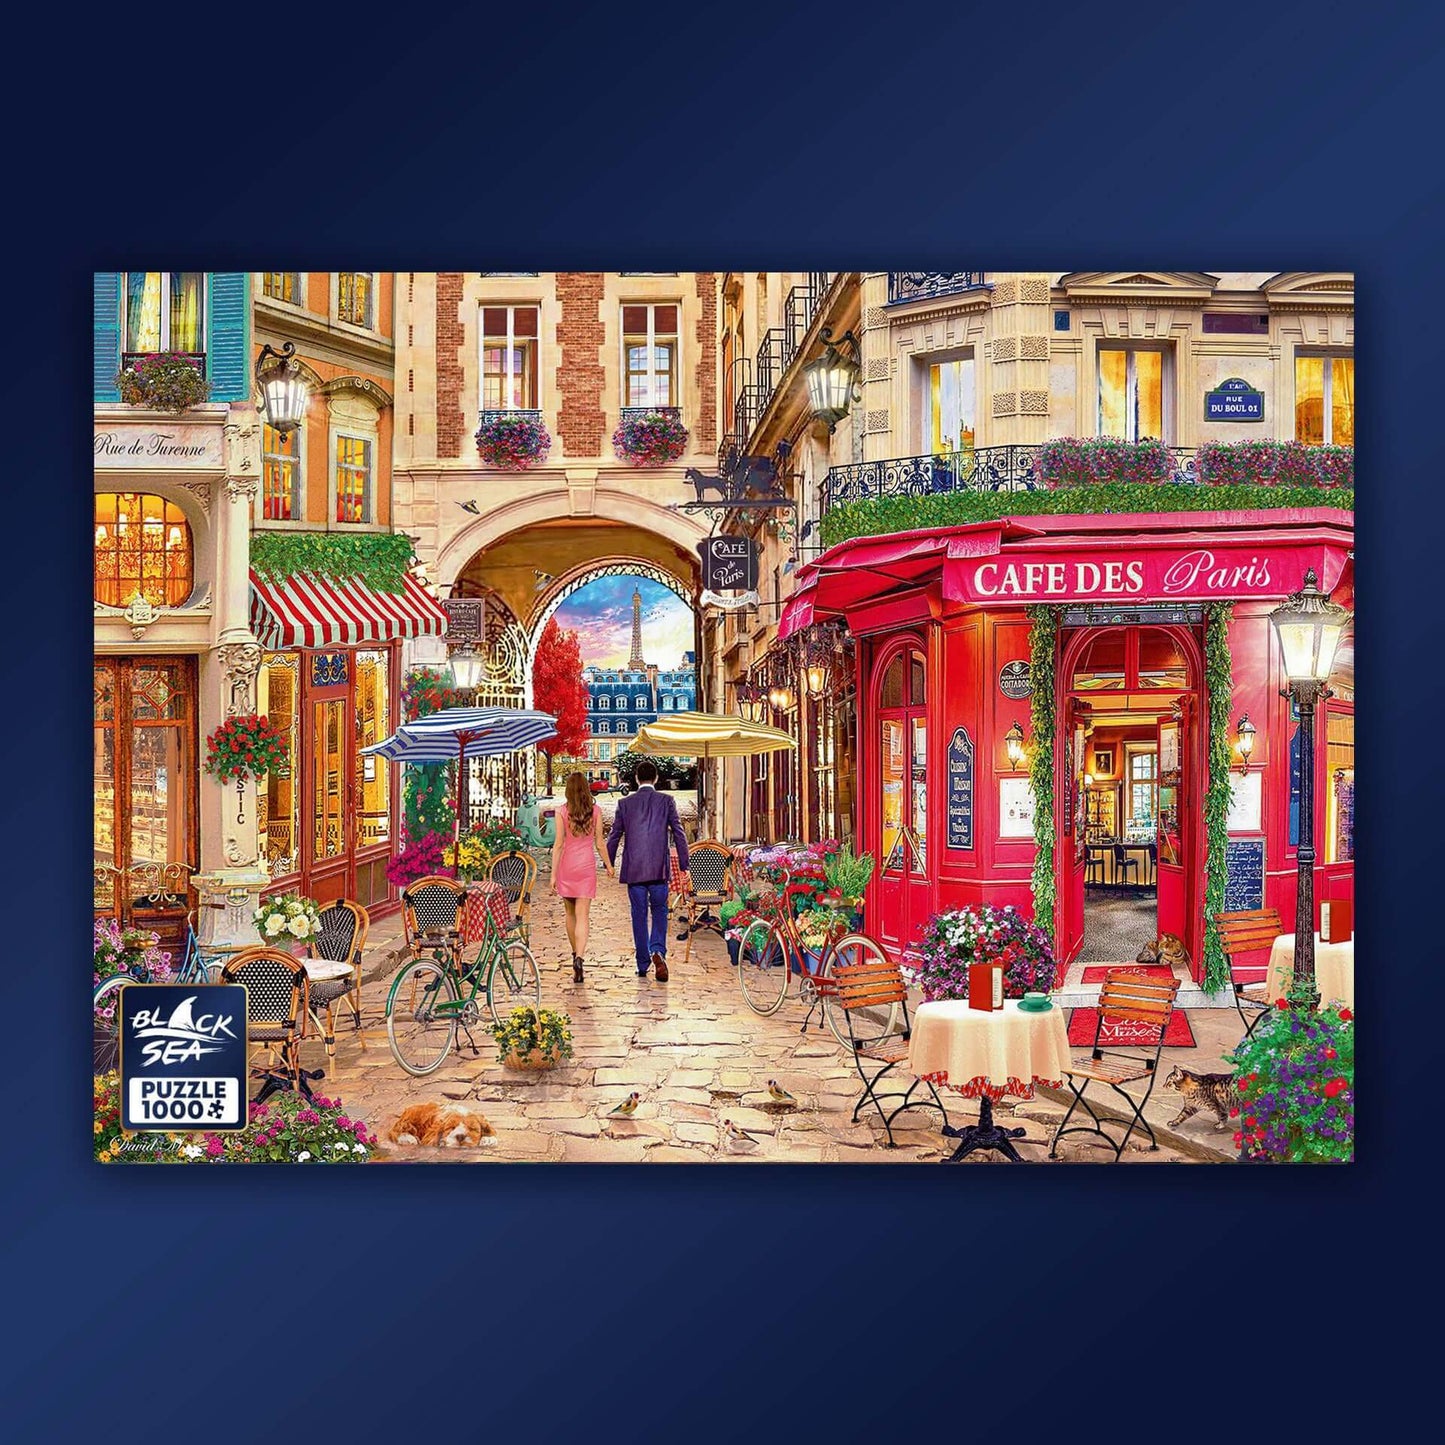 Puzzle Black Sea Premium 1000 pieces - In the Heart of Paris, The heart of Paris is beating to the chanson’s rhythm, the fragrance of freshly baked croissants and coffee float in the air, caressing the senses. The mild pigments and impressive knack for de